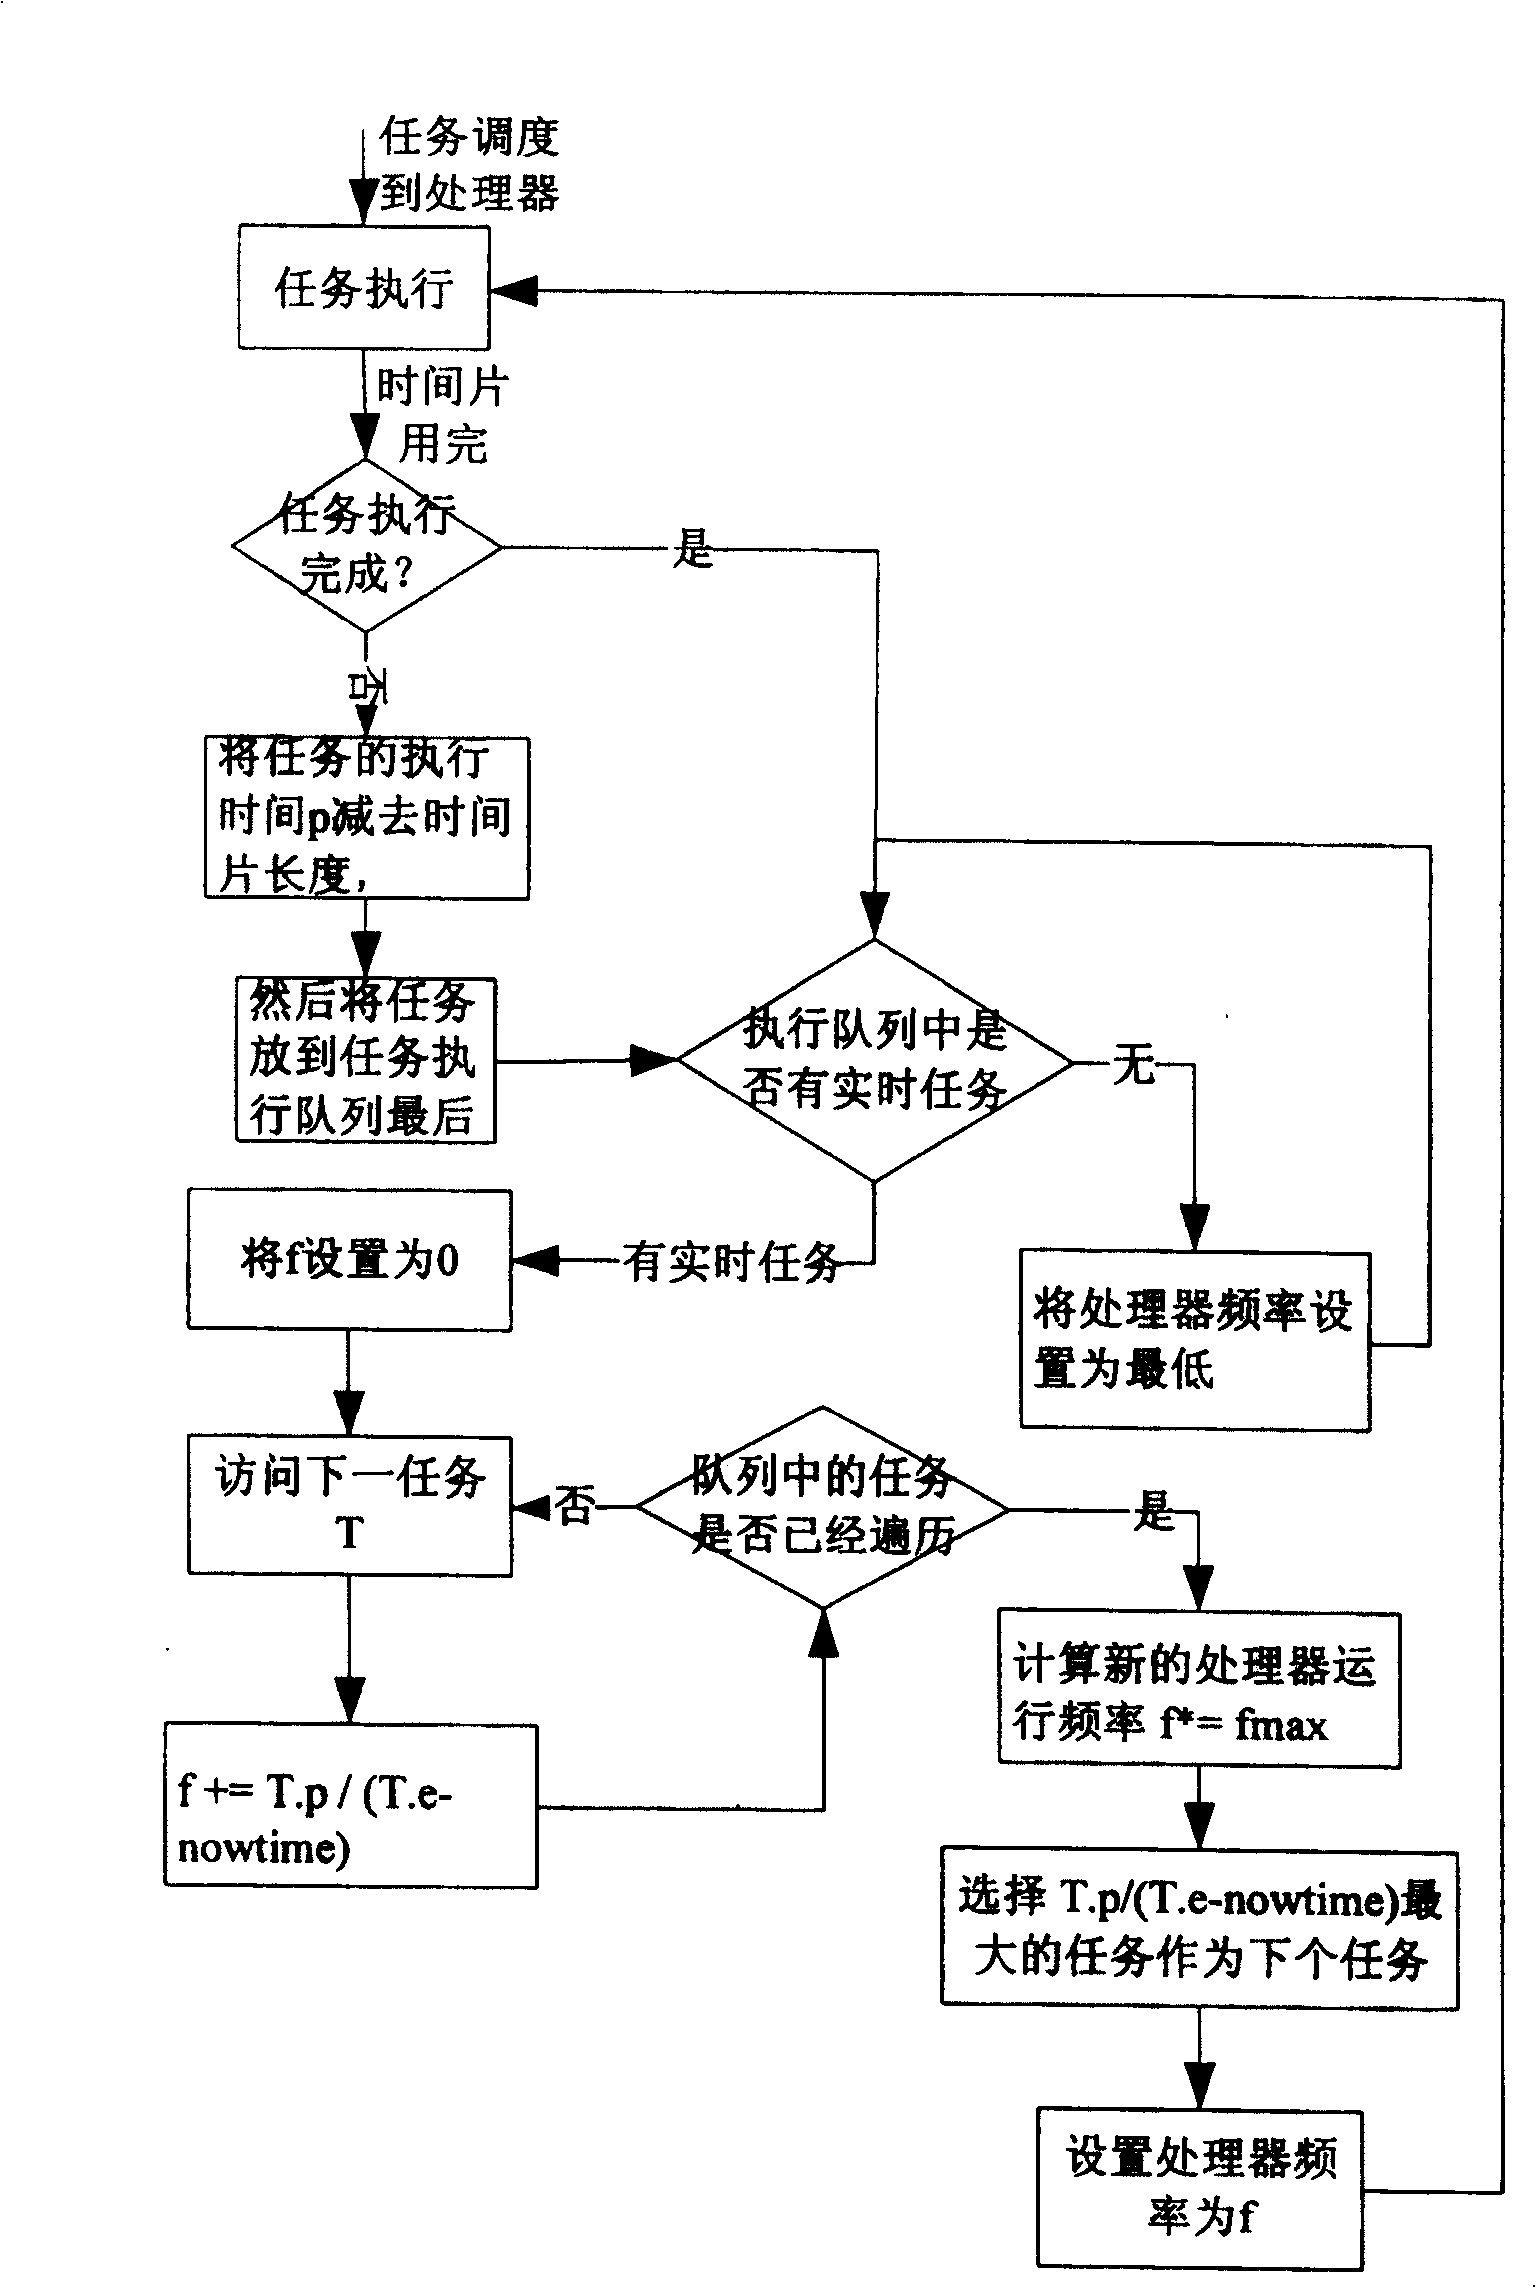 Low power consumption real time task parameter model dispatching method facing embedded system